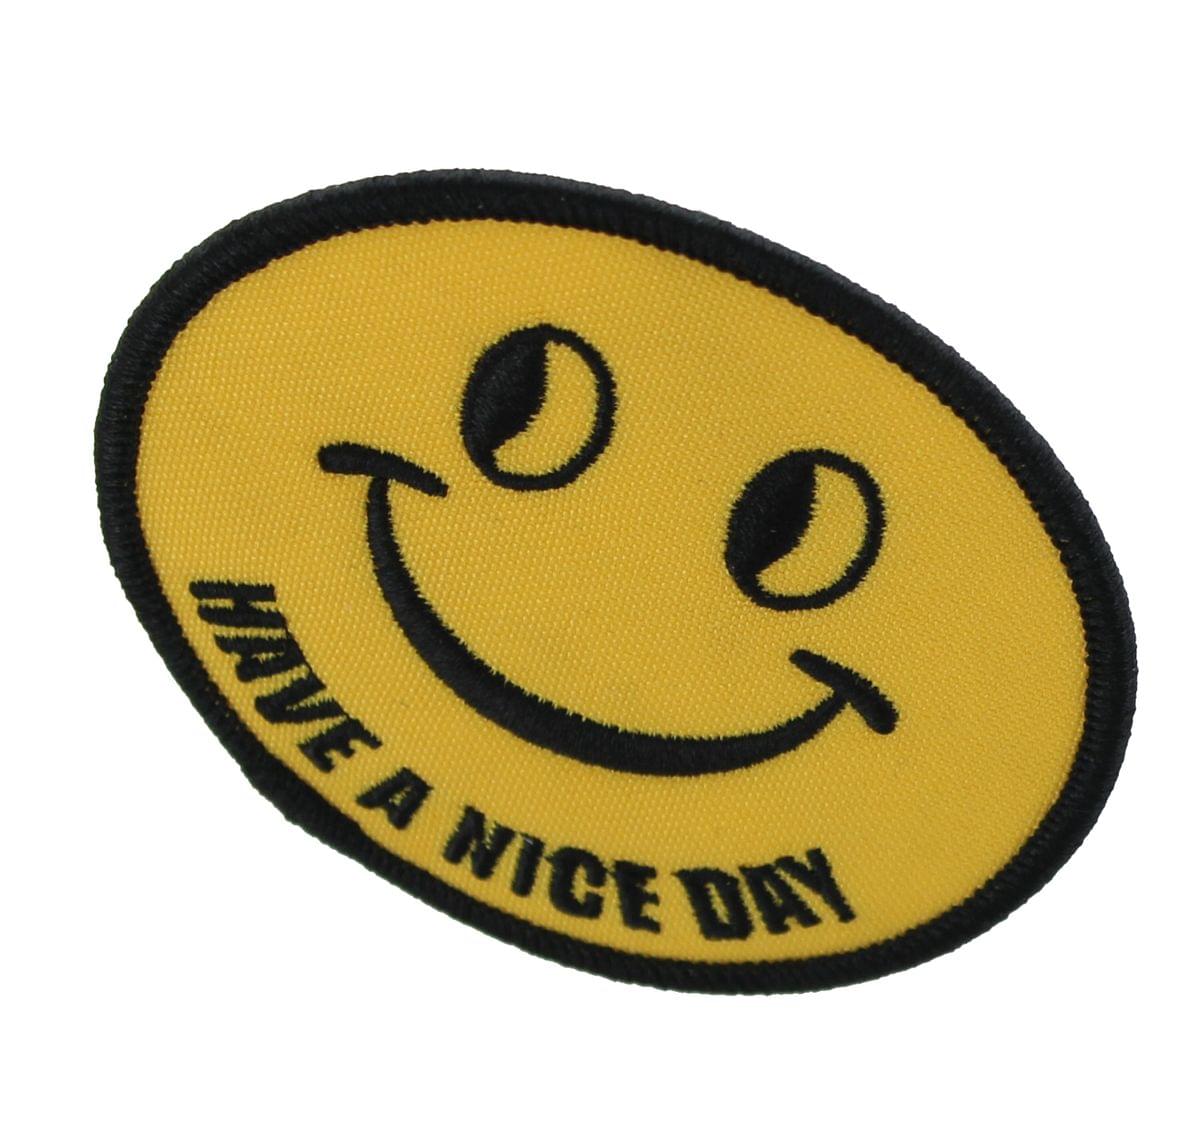 Iron-on Have a Nice Day Patch